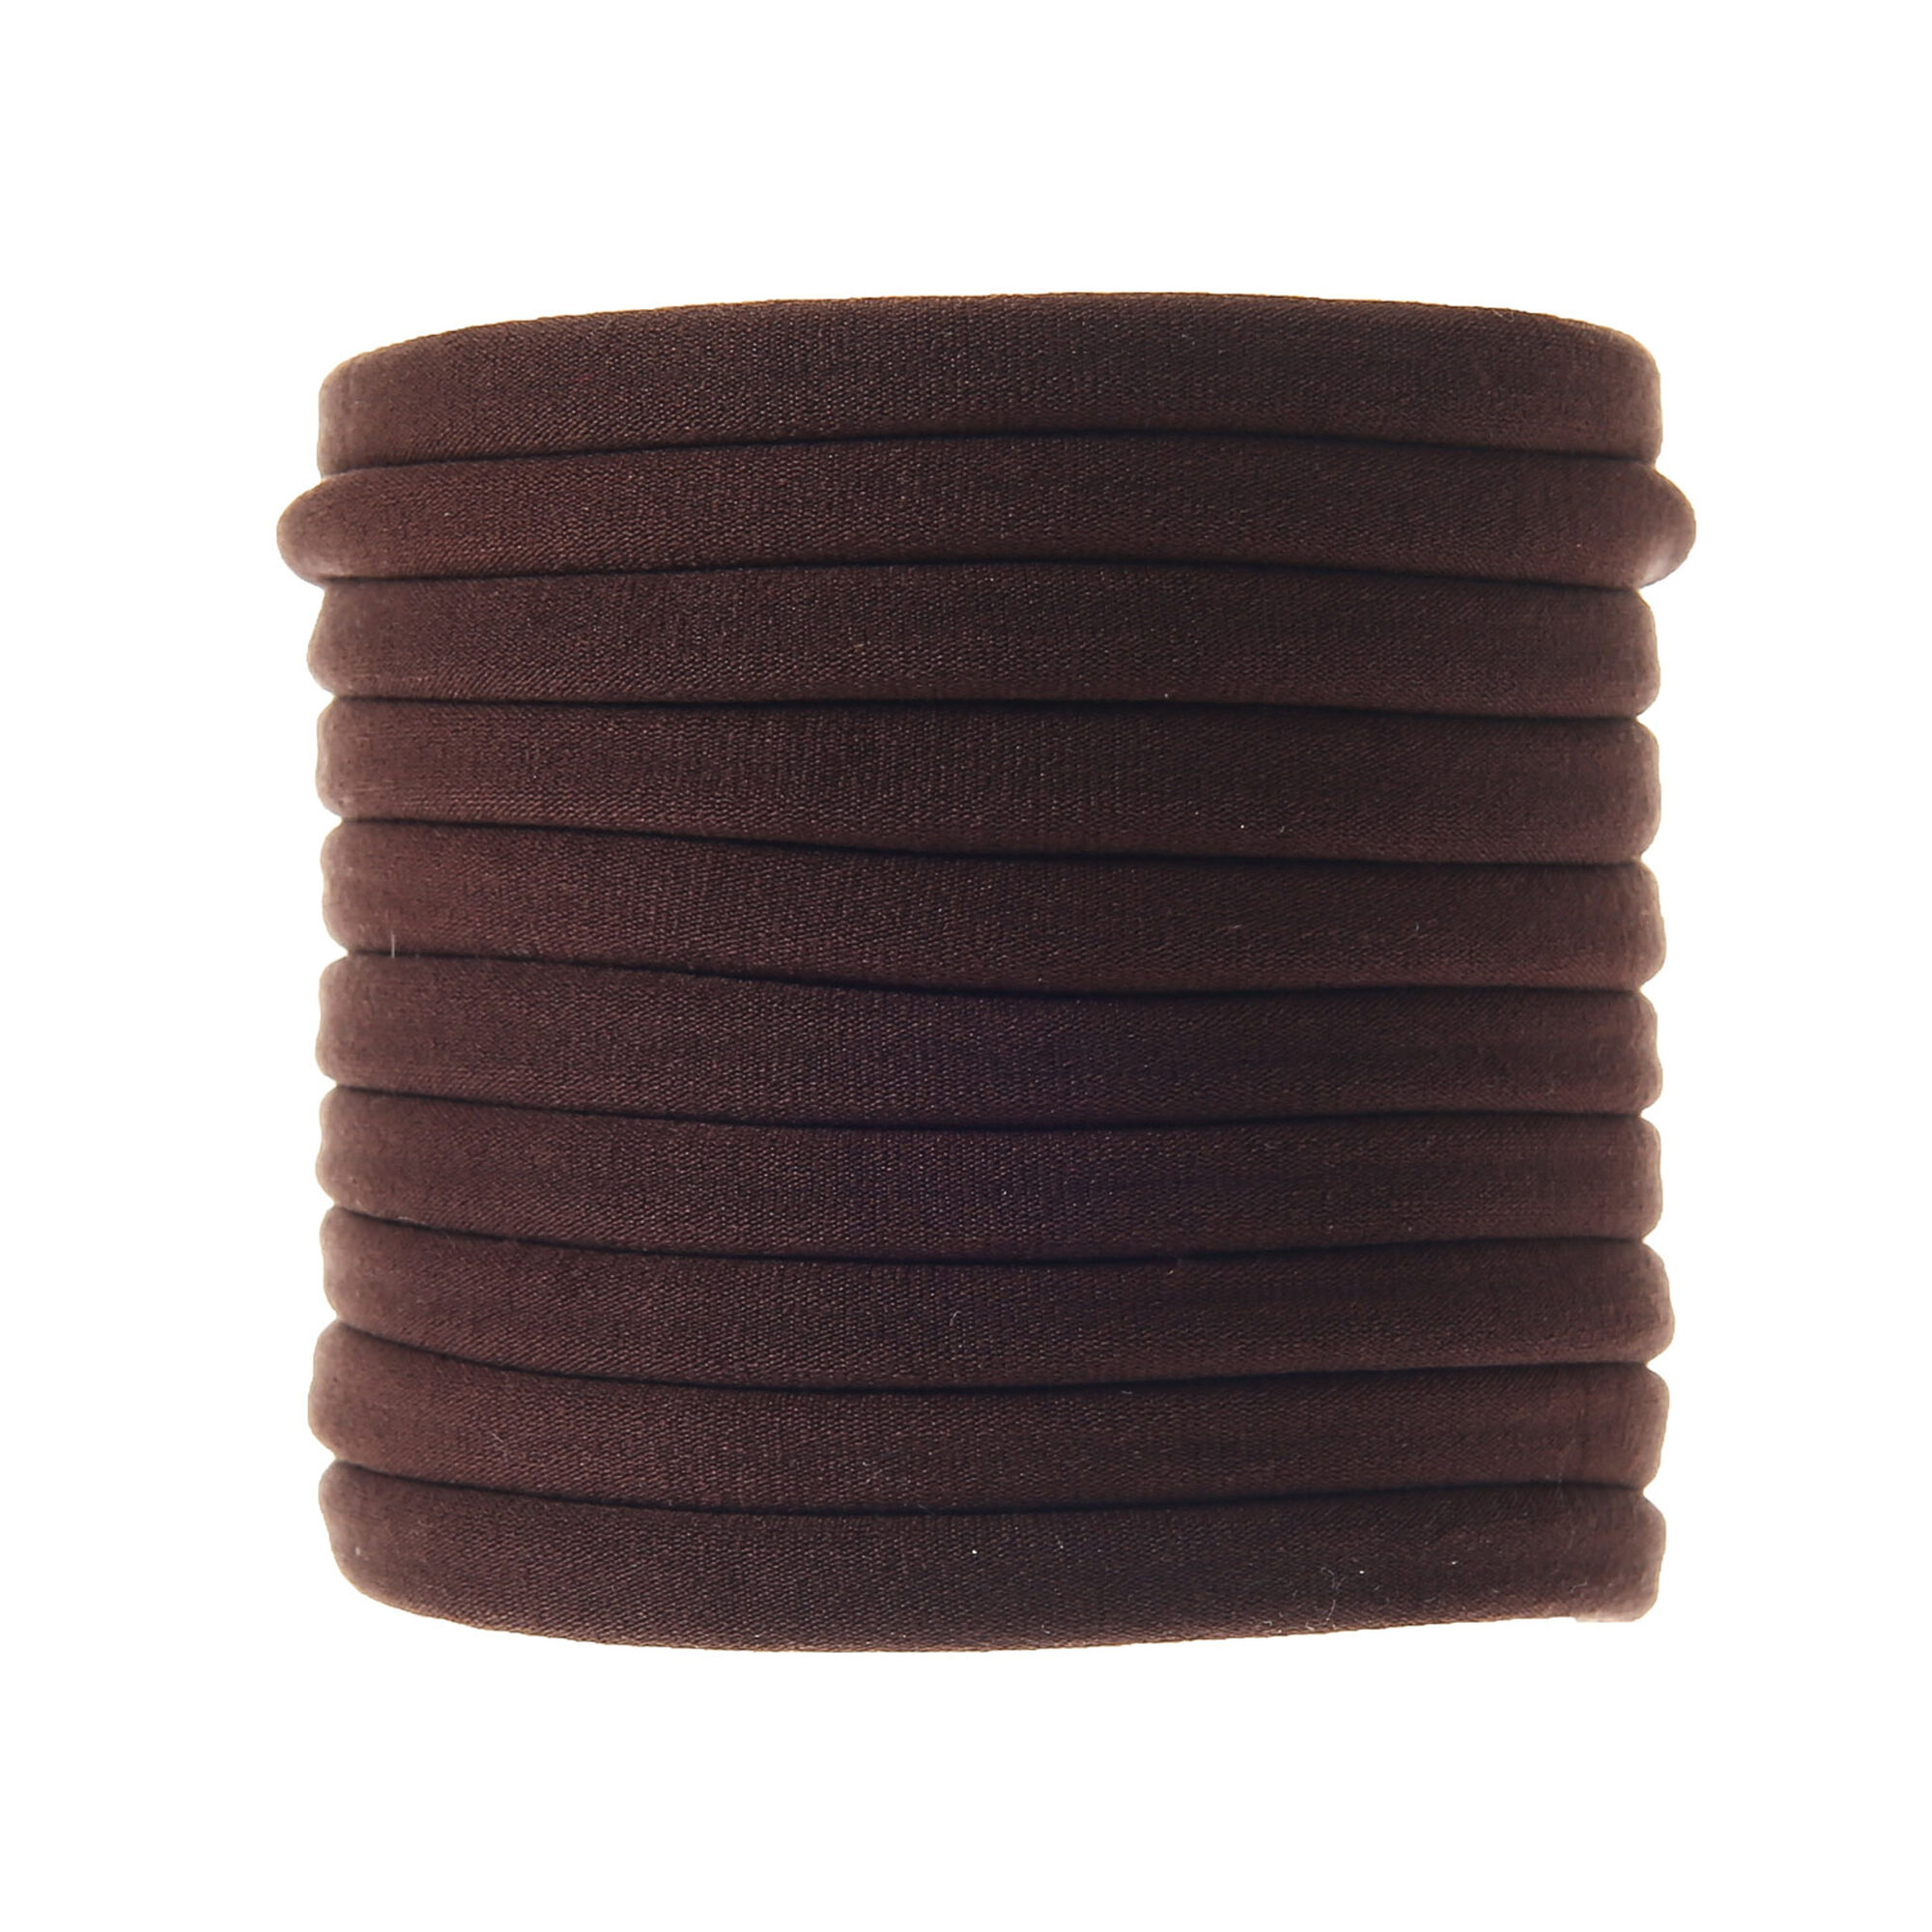 View Claires Hair Bobbles Brown 10 Pack information